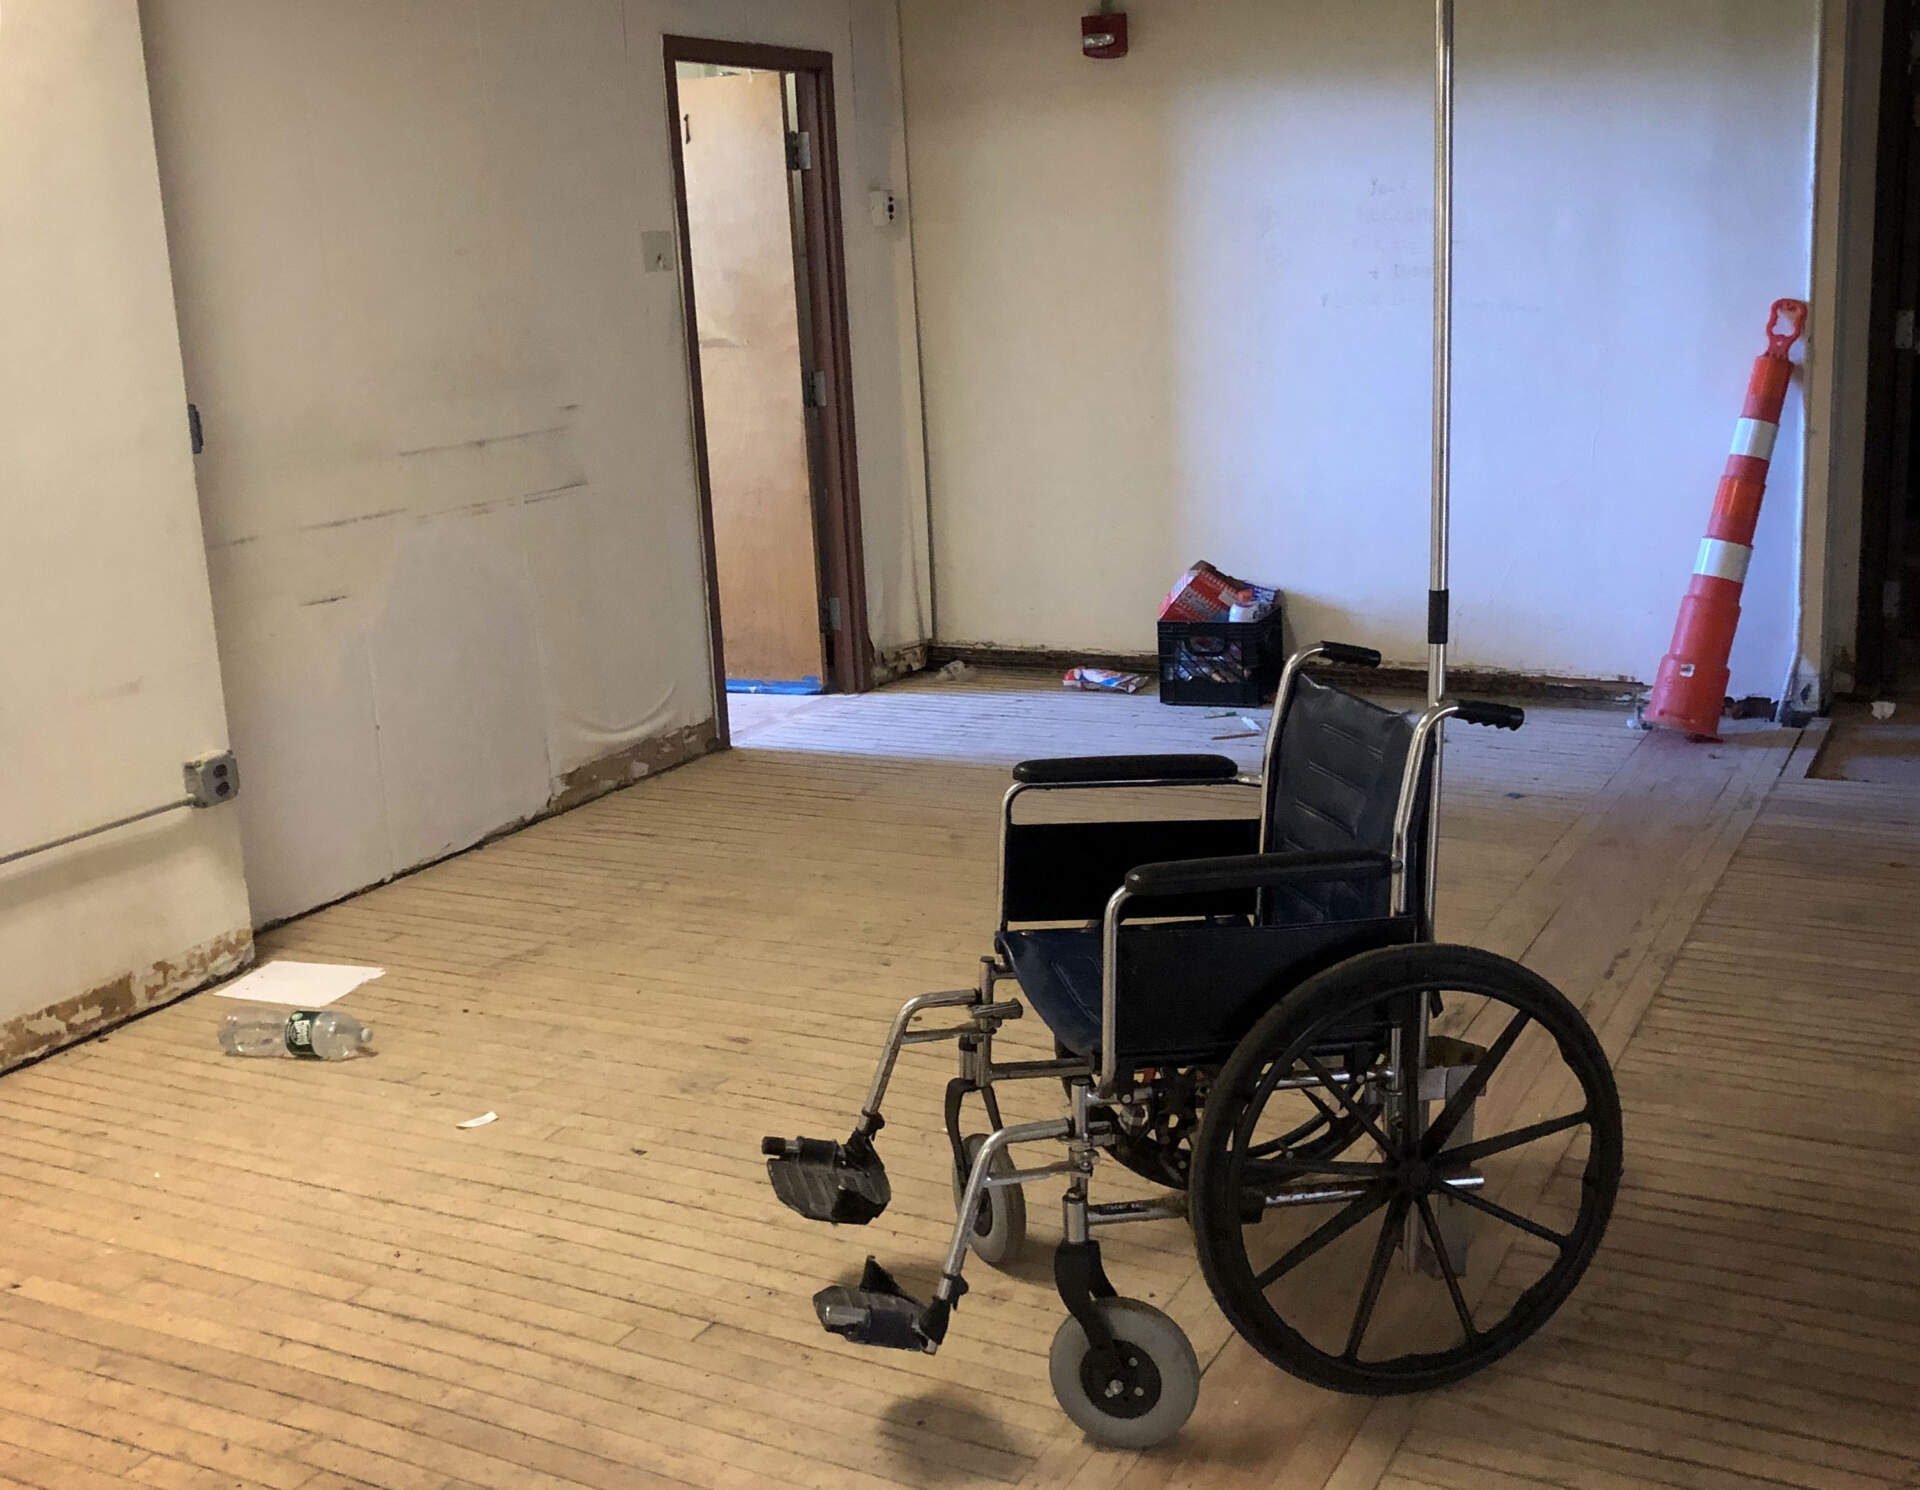 A wheelchair inside one of the now-dilapidated buildings that once served as a recovery campus on the island. (Deborah Becker/WBUR)